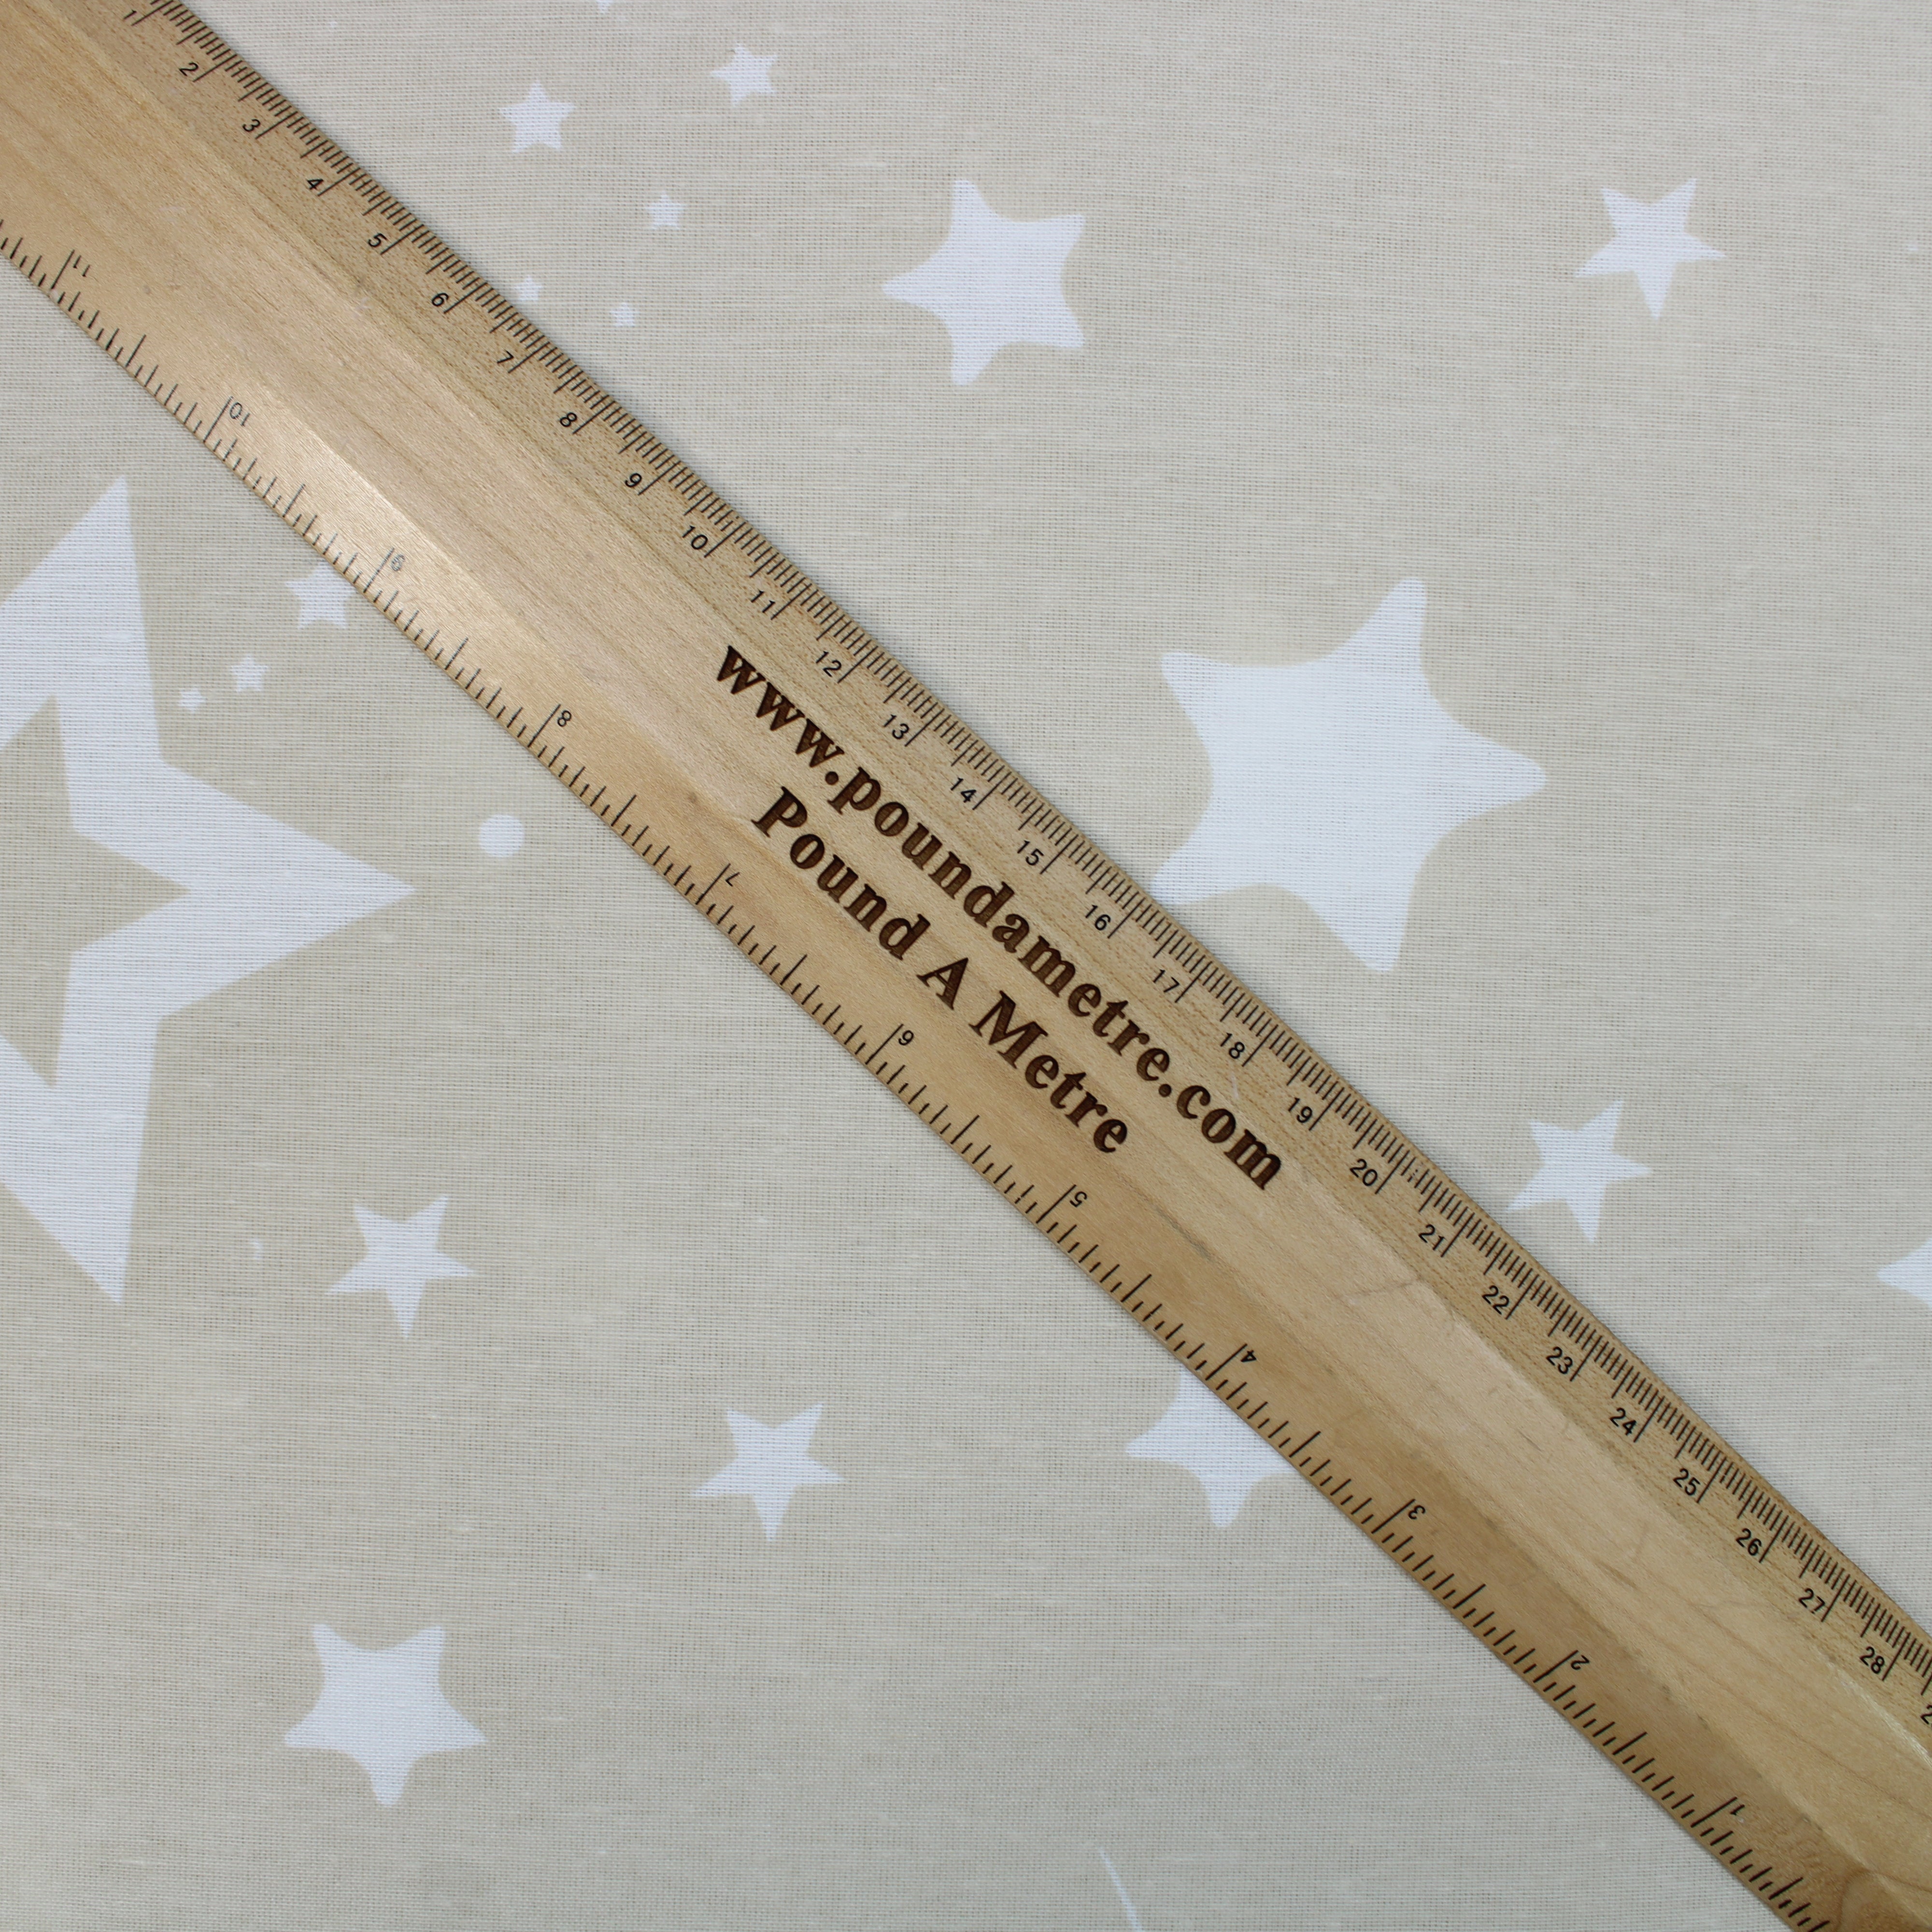 Premium Quality Super Wide Cotton Blend Sheeting, 'Wish Upon A Star', 94" Wide - Beige